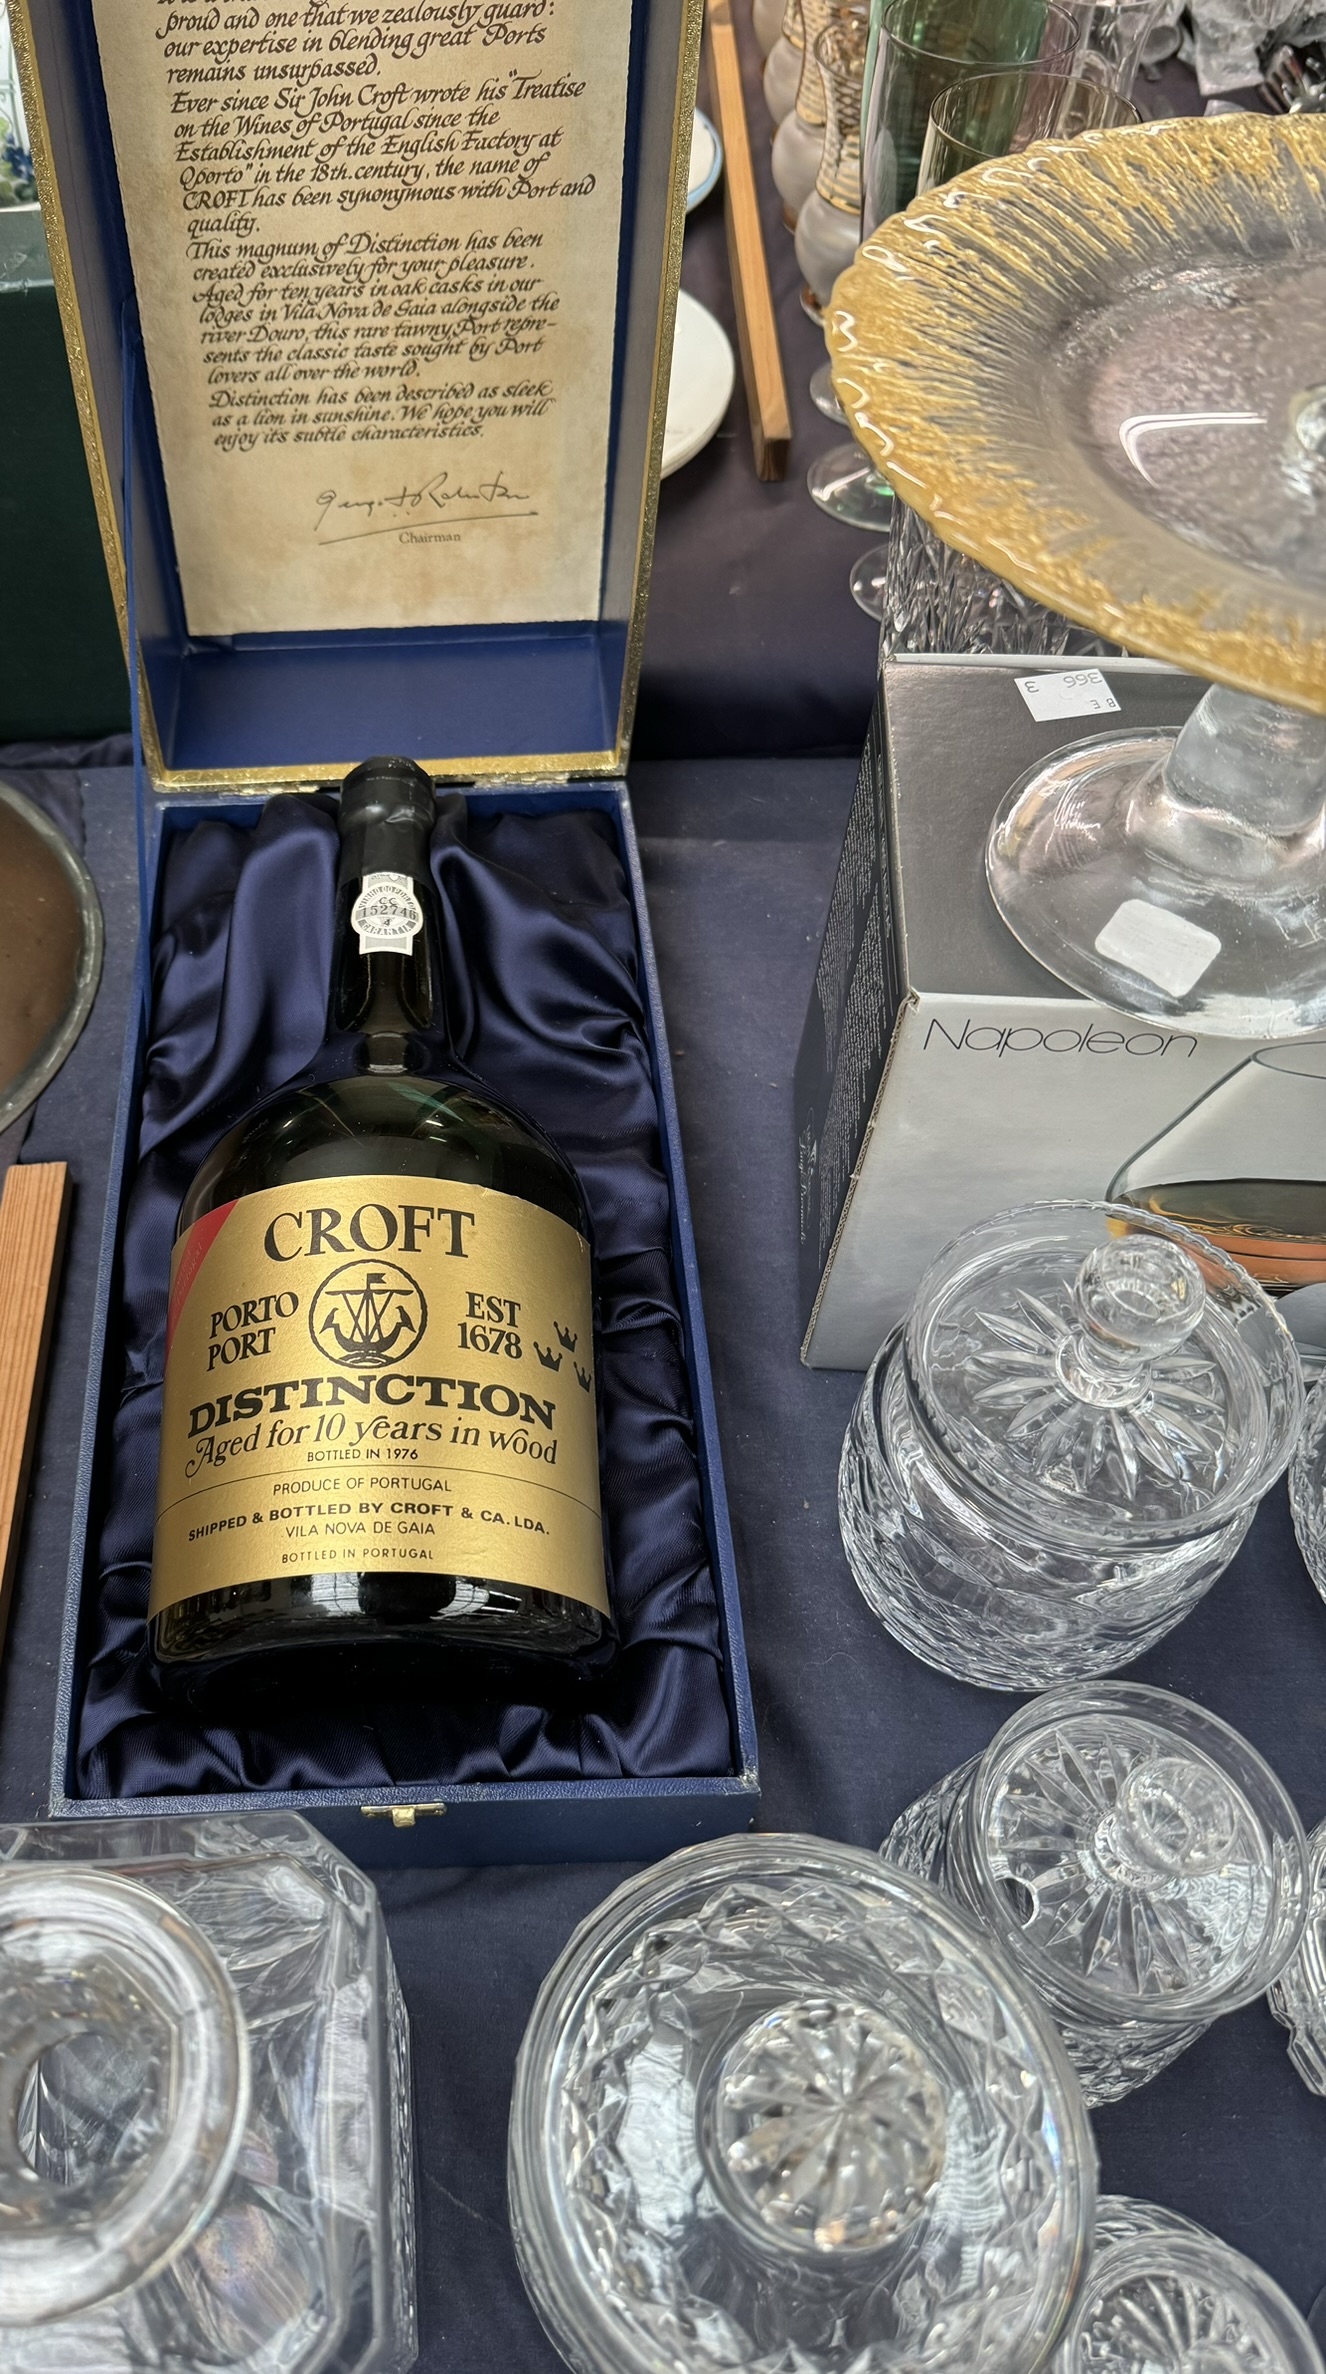 A 150ml bottle of Croft Distinction Port together with a bottle of Grand Marnier, crystal decanters, - Image 2 of 2